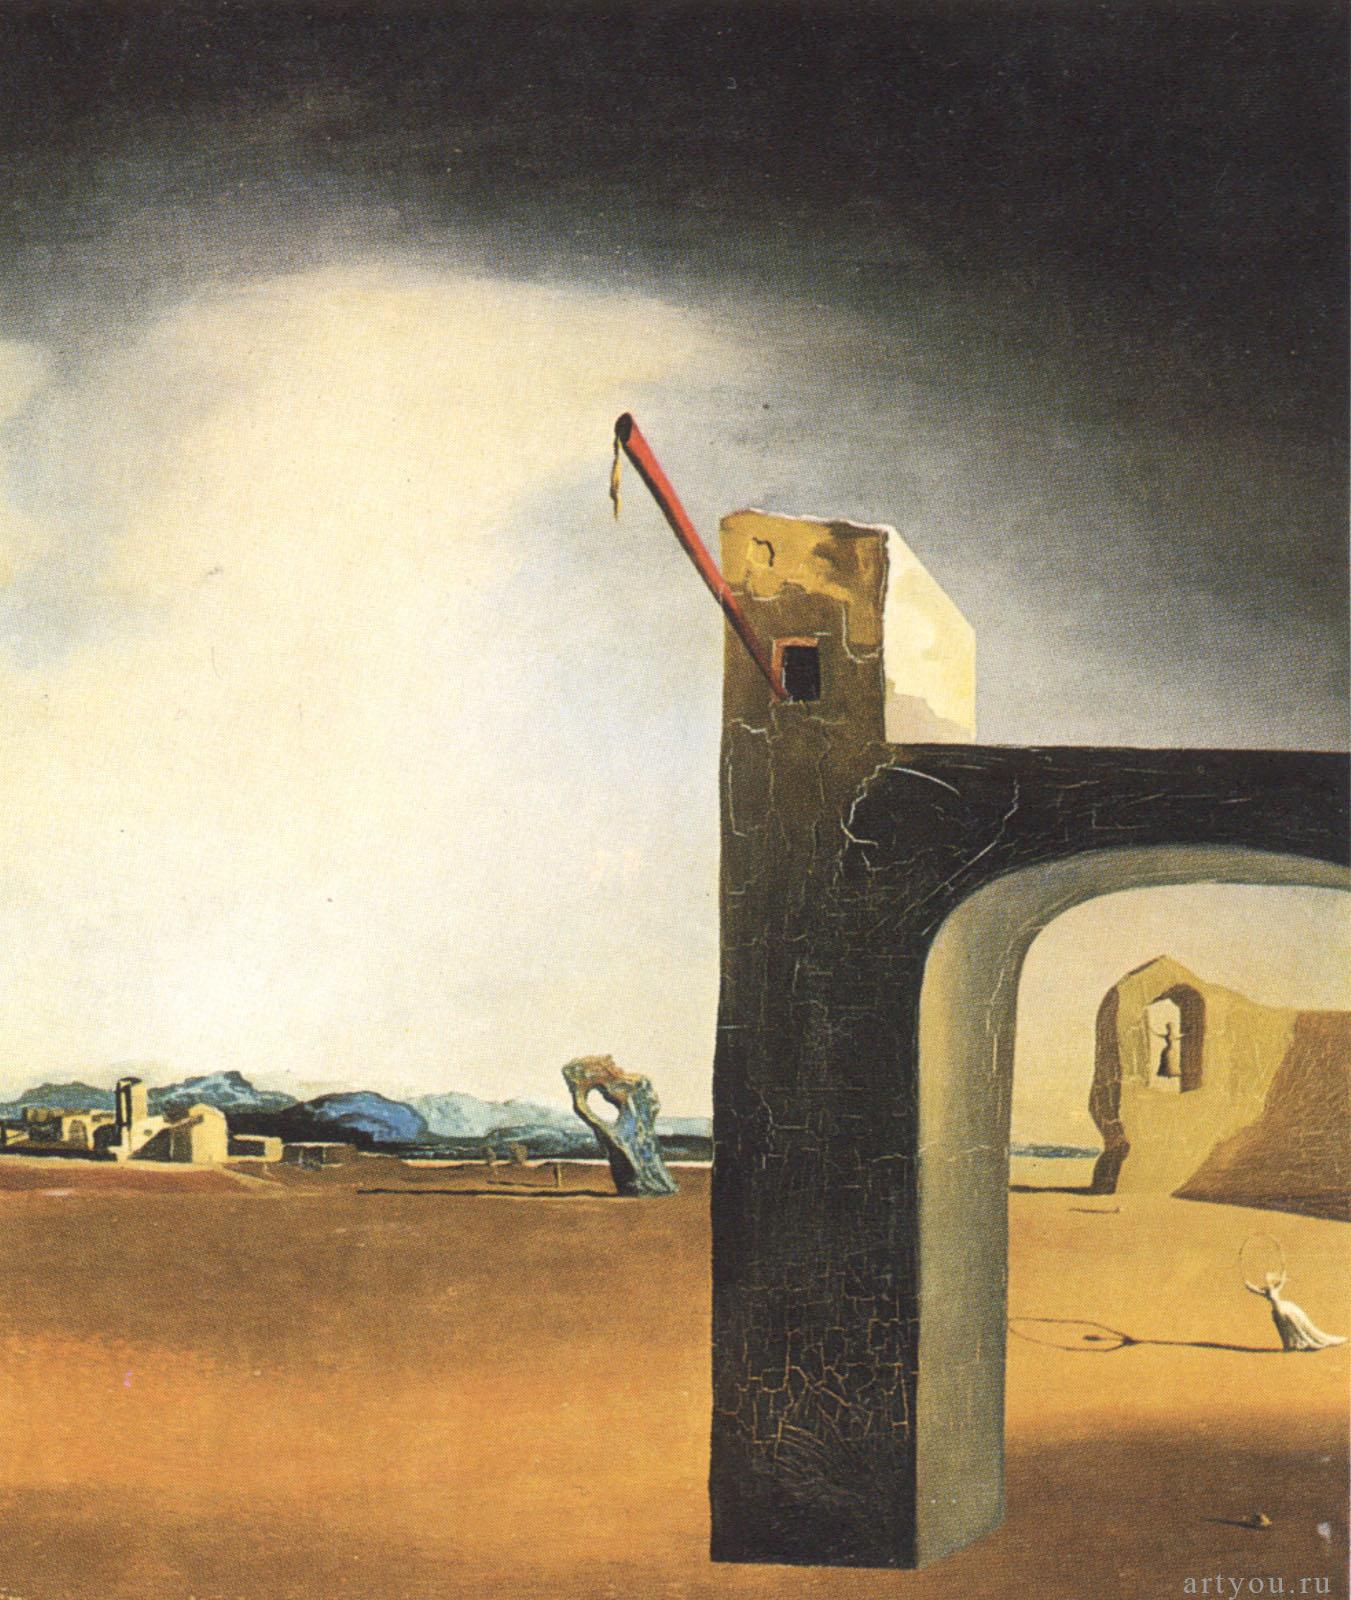 A Salvador Dalí Expert Says He Has Rediscovered One of the Artist's ...